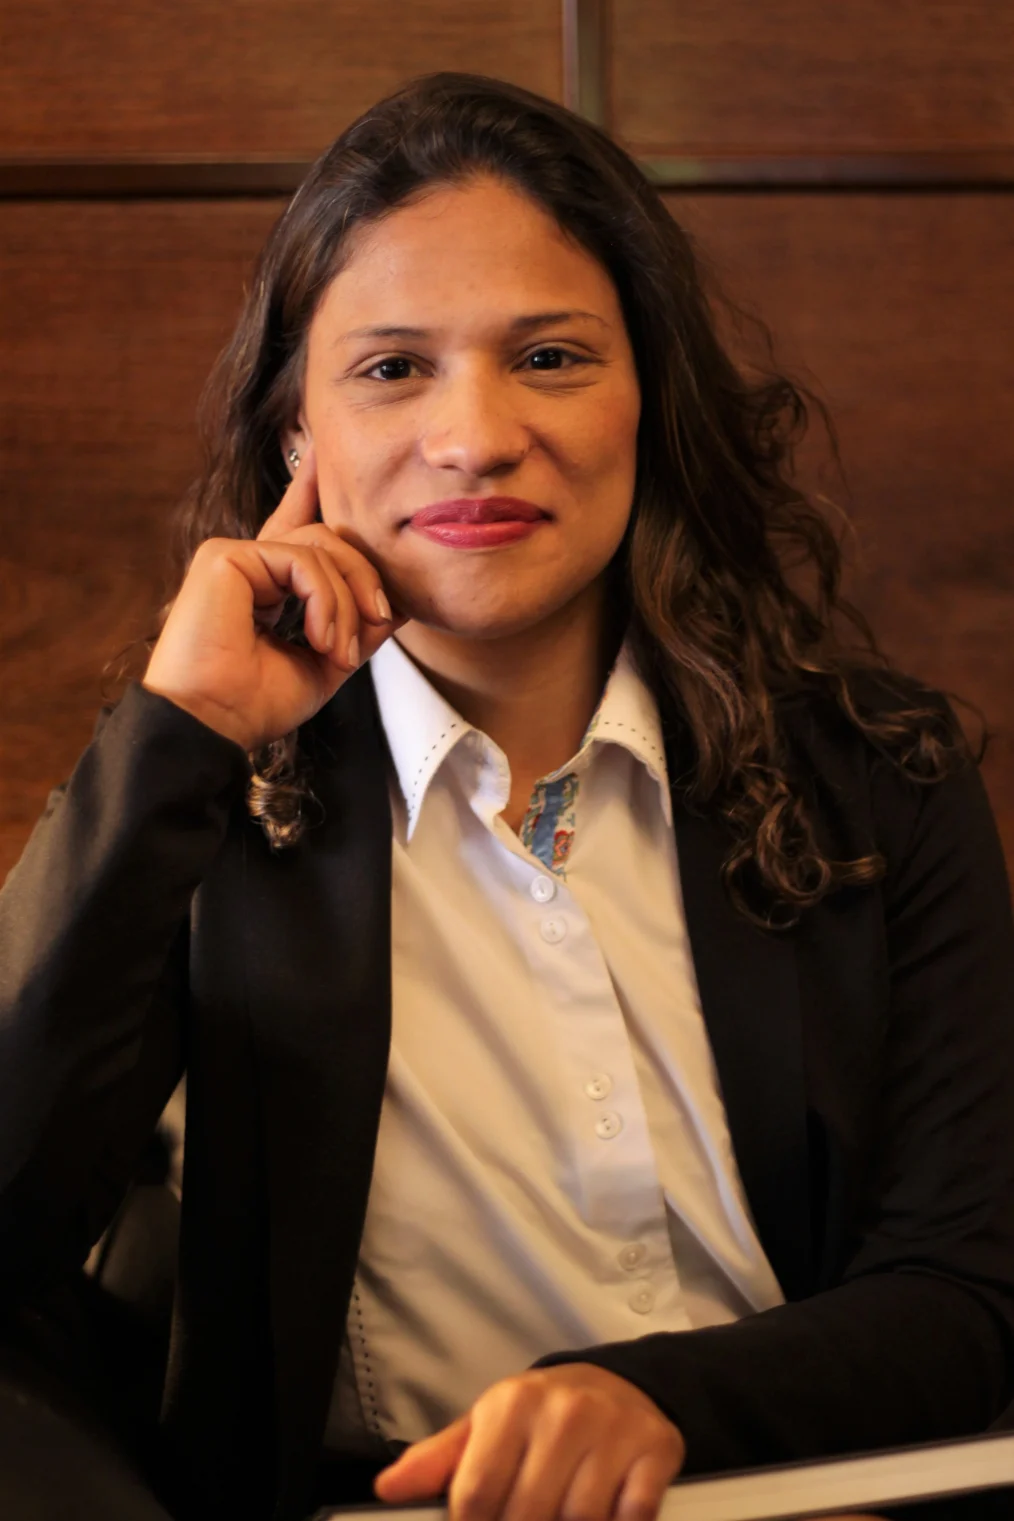 A young woman with long, wavy hair dressed in a white button-up shirt and black suit jacket poses for the camera. She has one hand on her cheek and one in her lap.